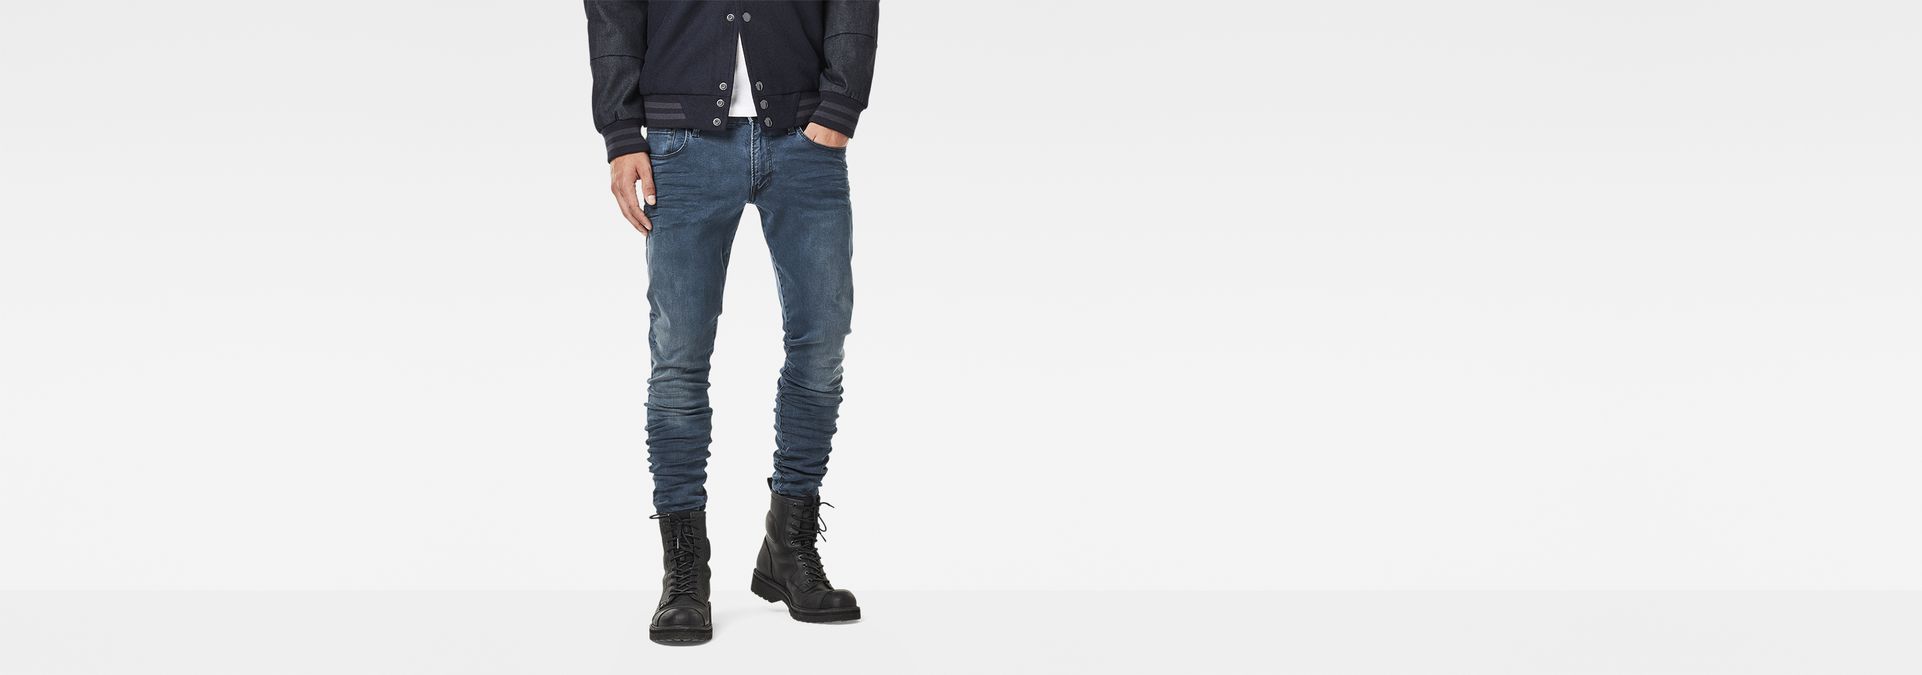 3301 Deconstructed Skinny Jeans | ライトブルー | G-Star RAW®